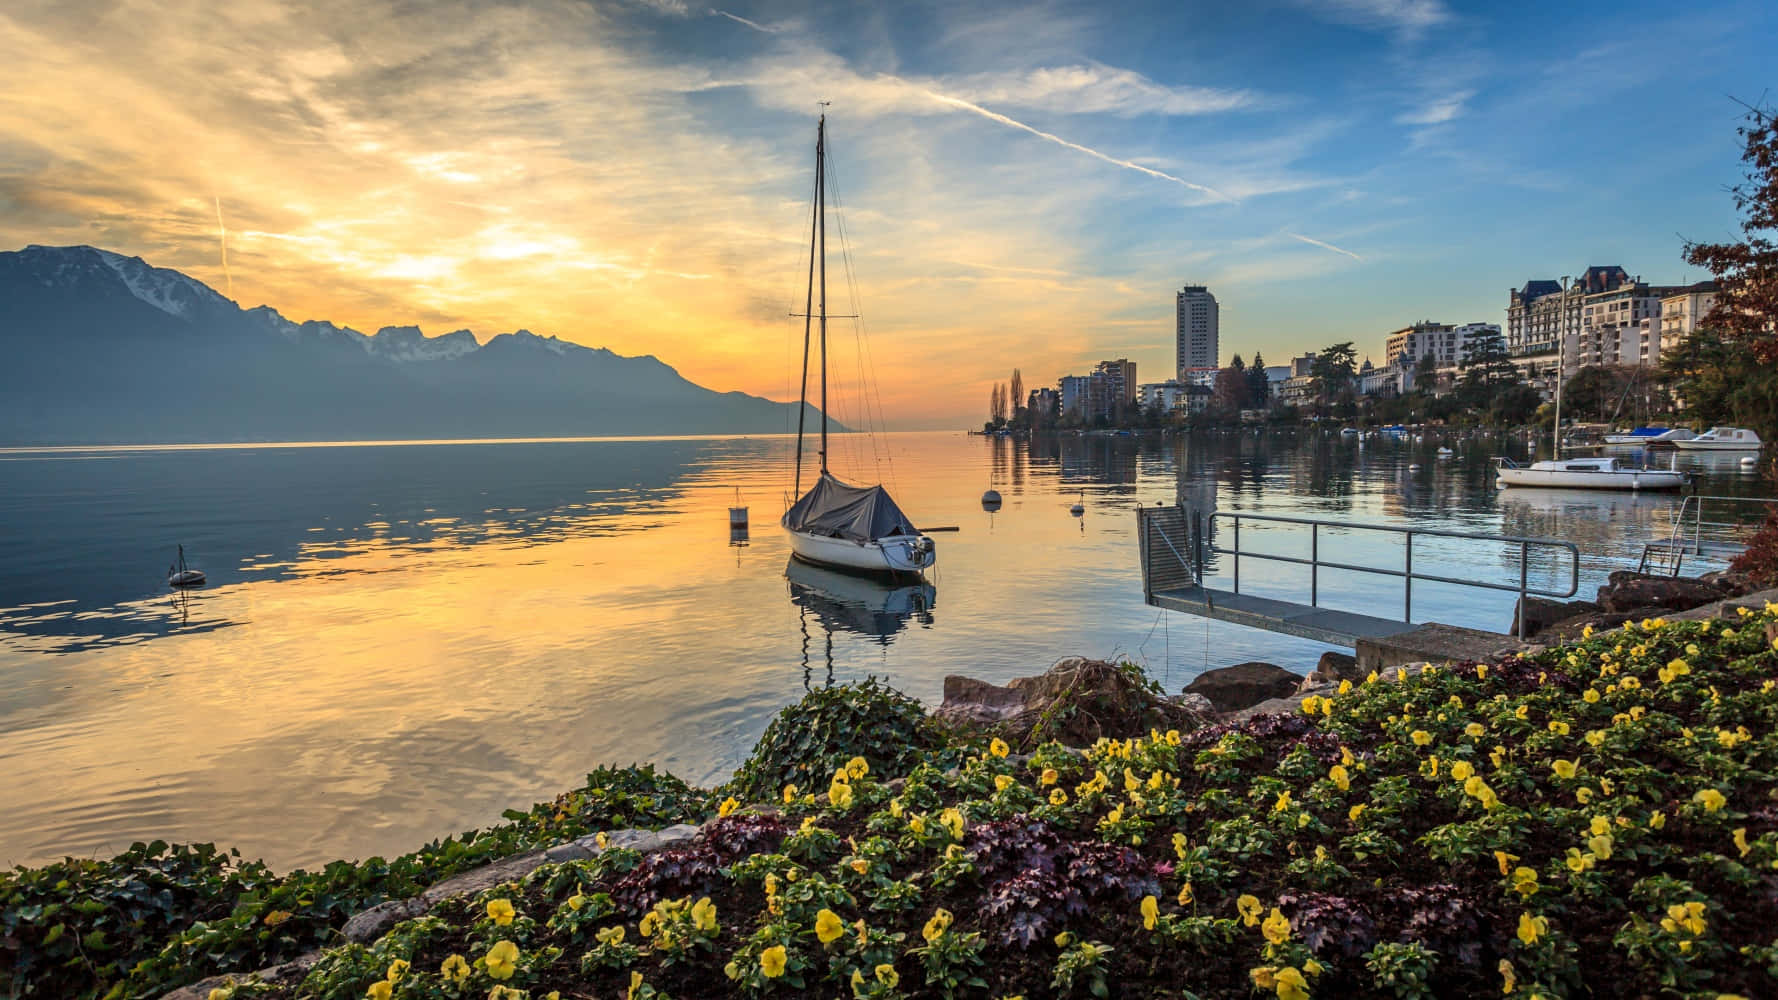 Picturesque View Of Montreux Lakeside Wallpaper